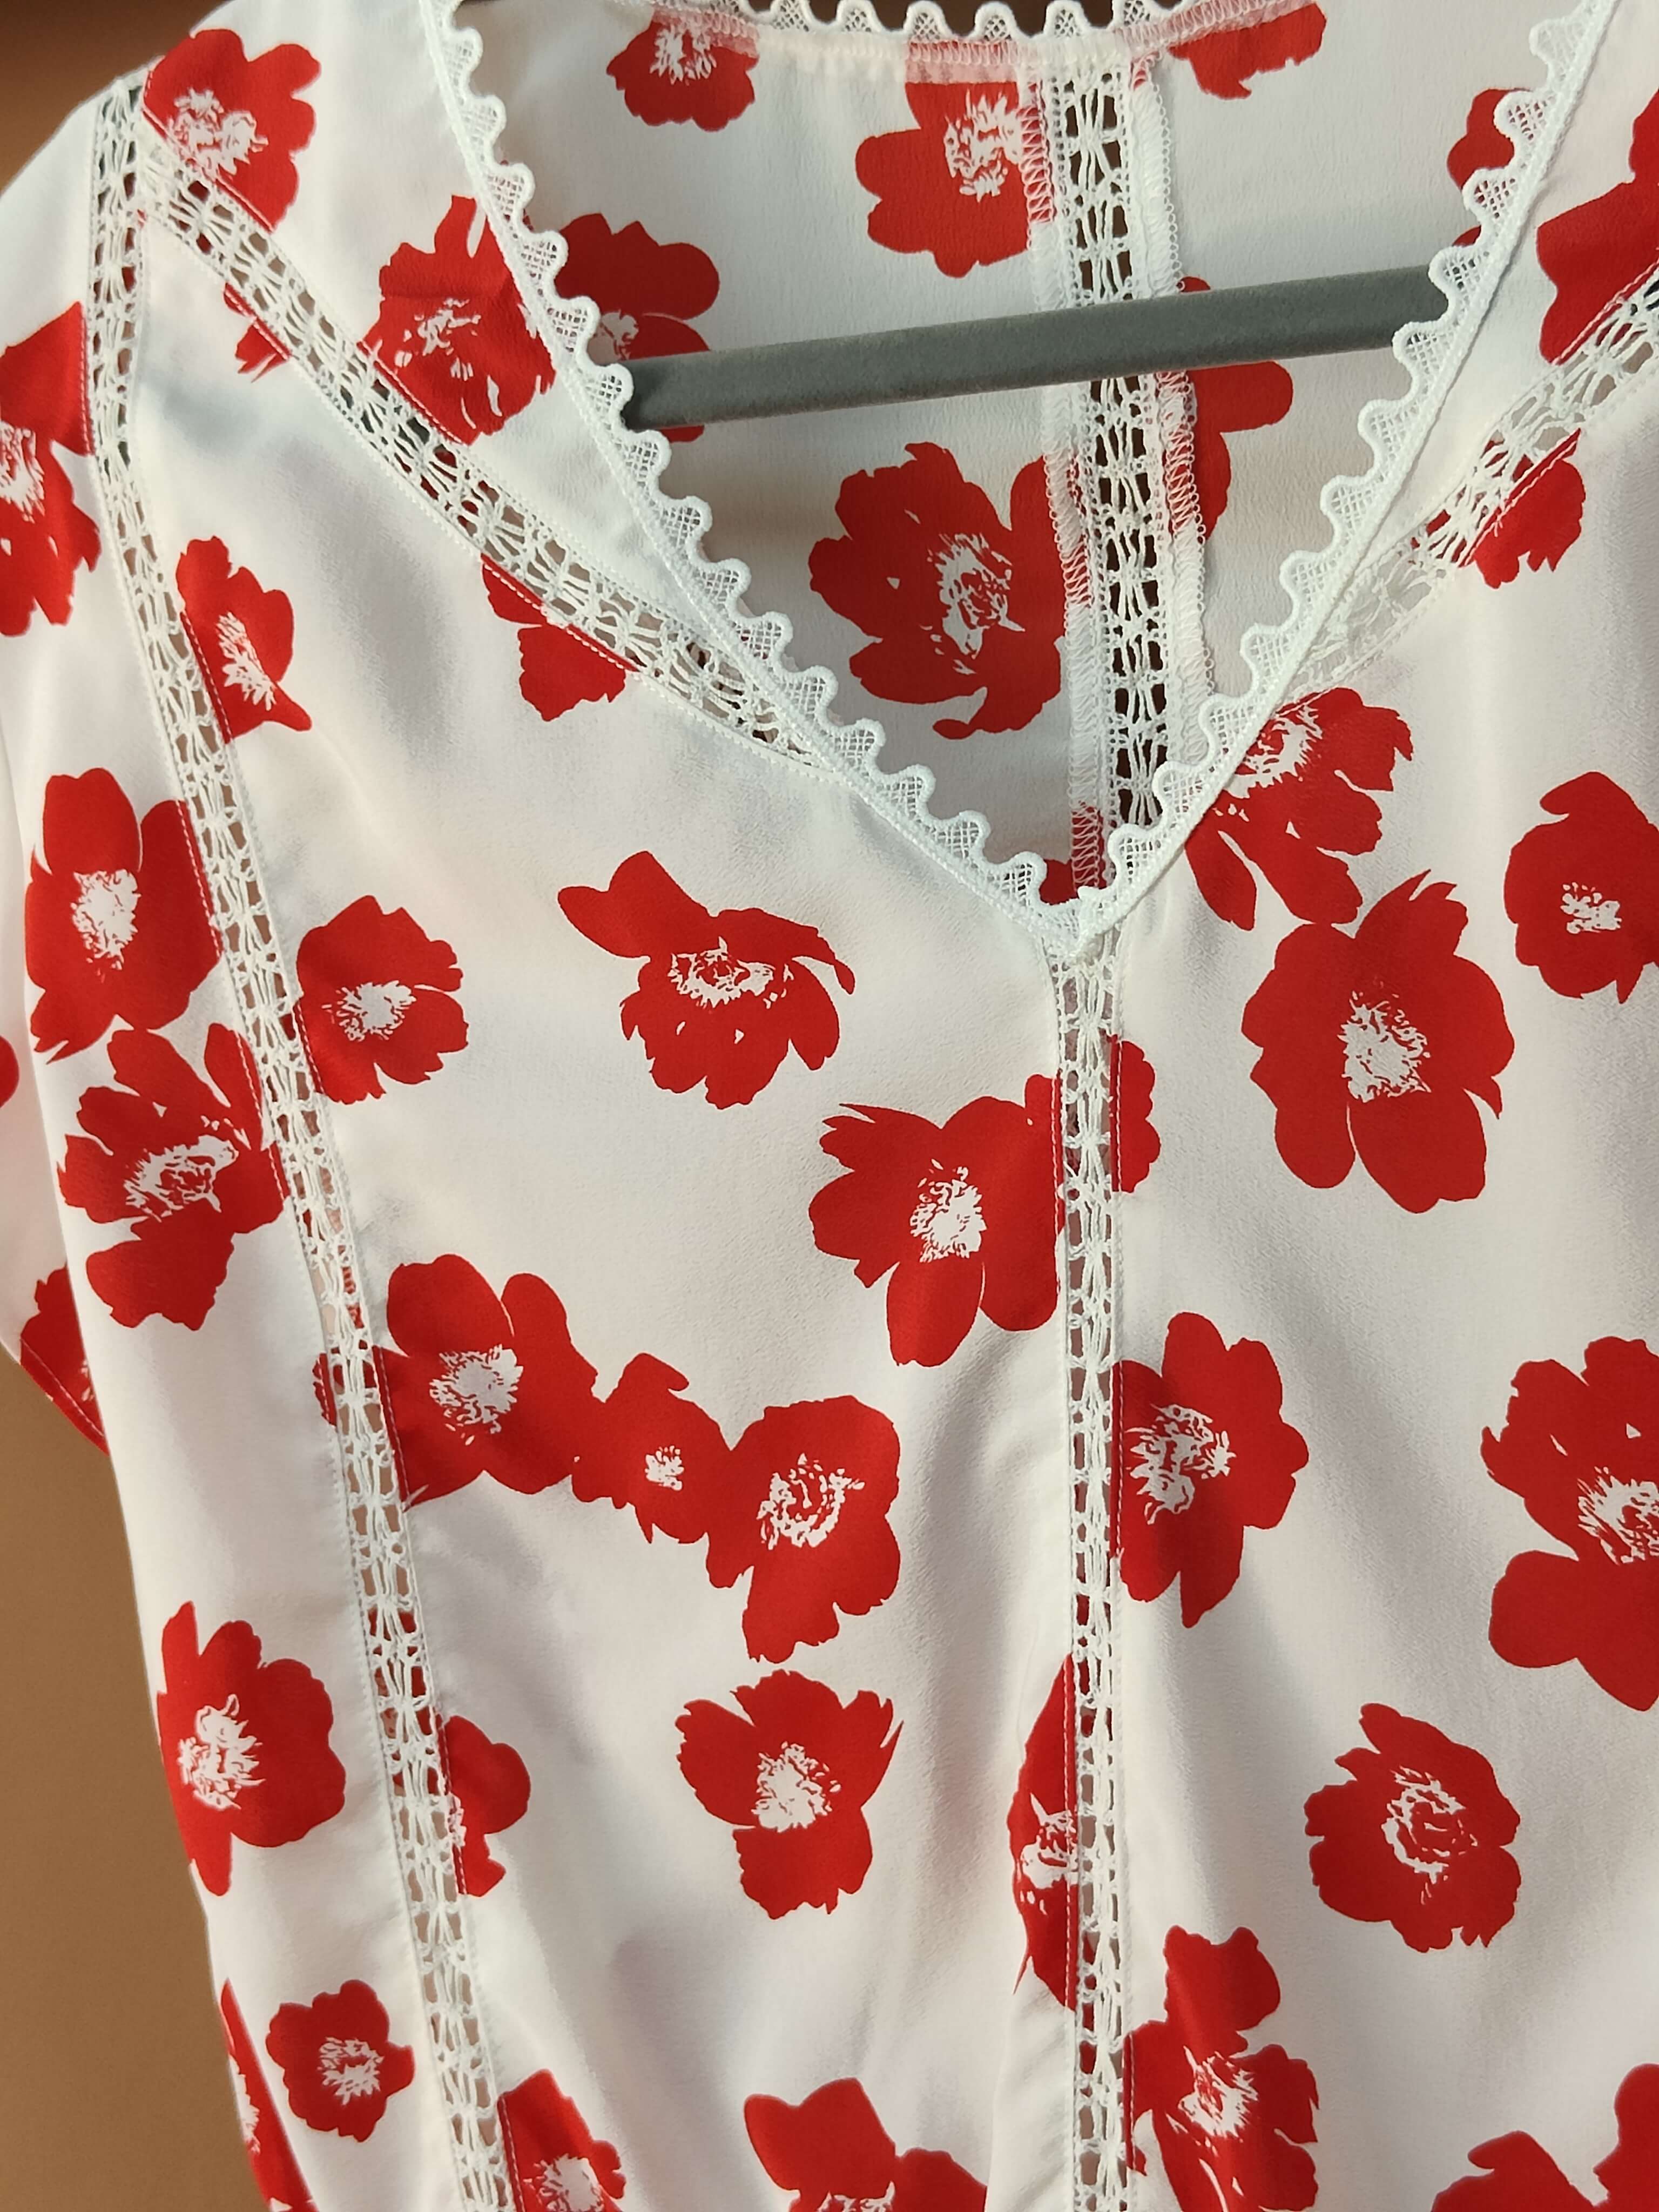 Private Label Floral Print Quality Red Short Sleeves T Shirt Top Blouse in Bulk